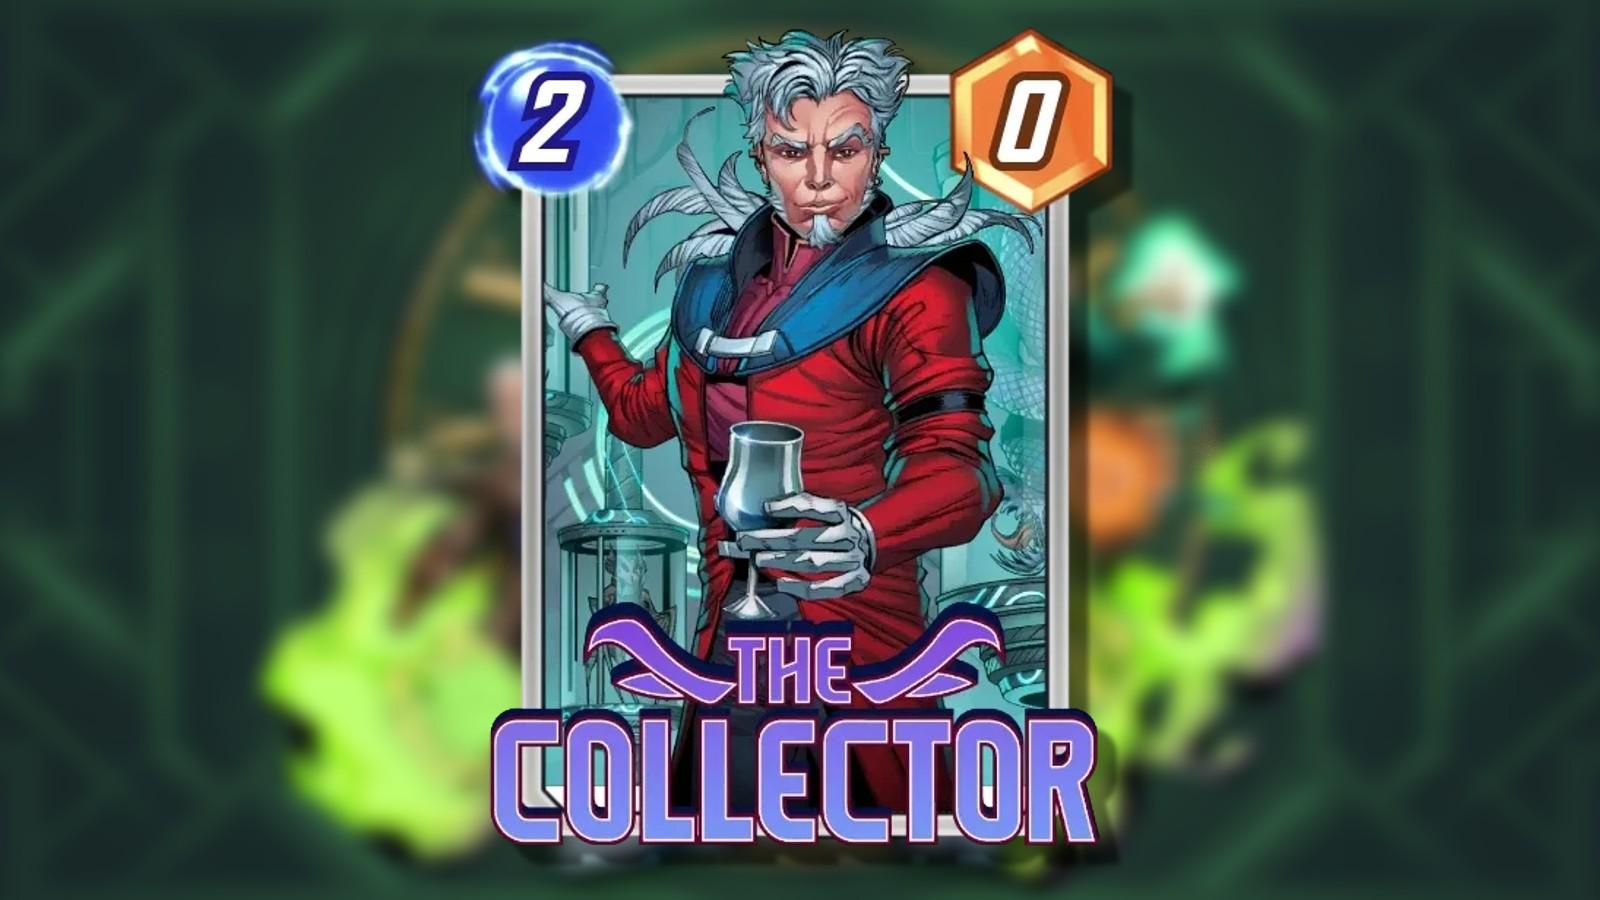 The Collector - Marvel Snap 